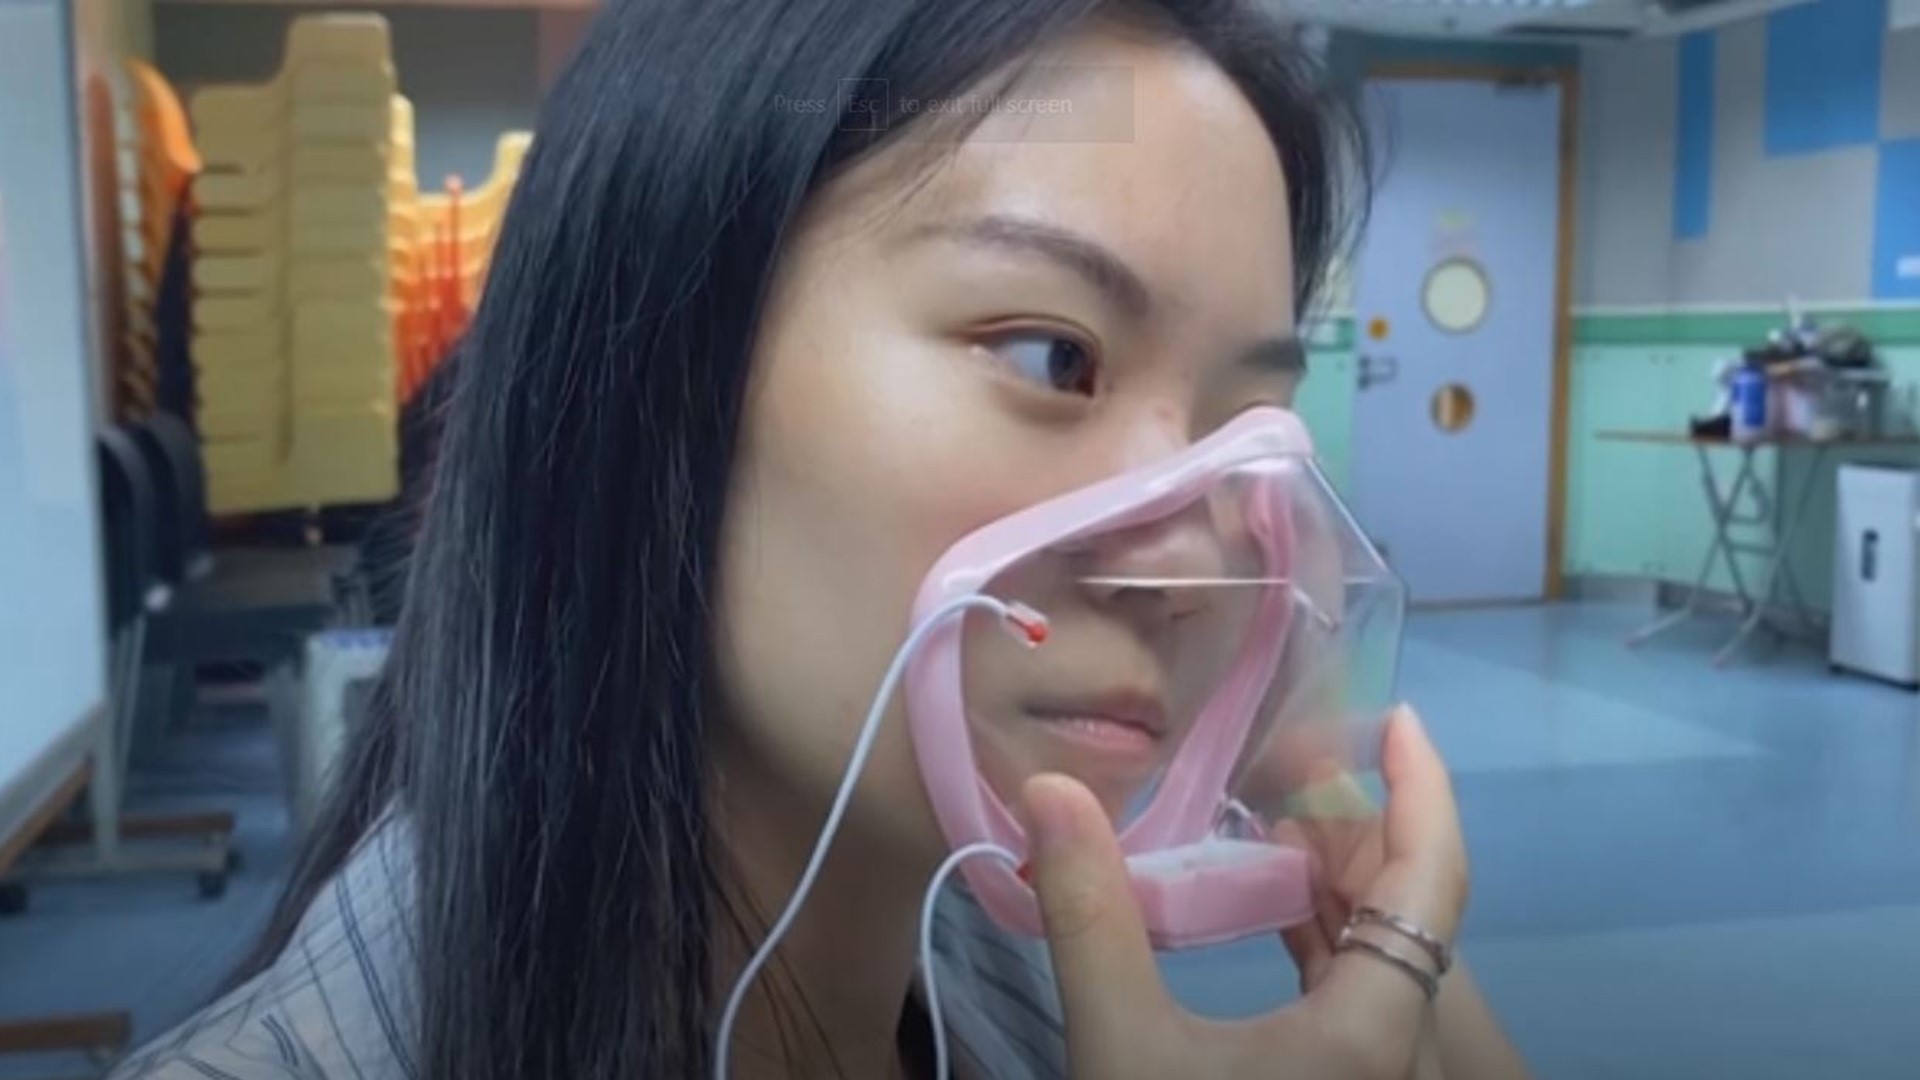 Experts in Hong Kong have created a new transparent face mask with a HEPA filter which they say enables barrier-free communication.